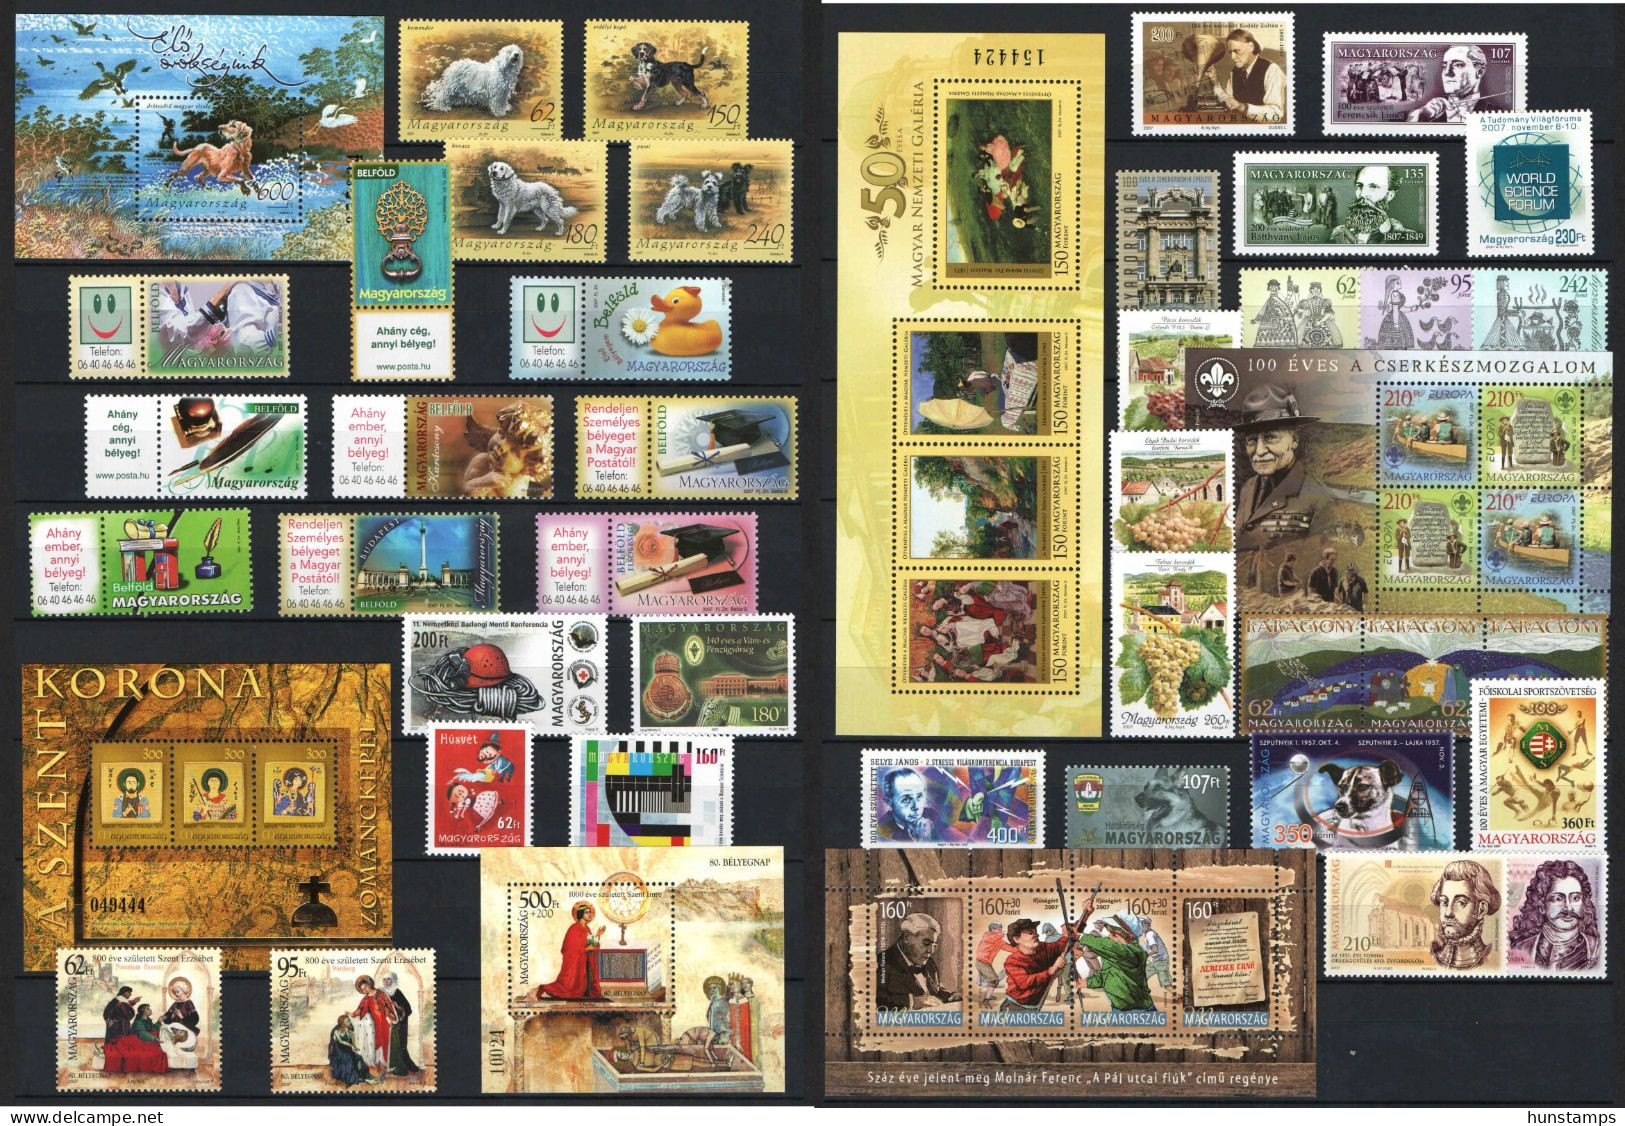 Hungary 2007. Full Year Set With Blocks (without Personal Stamps) MNH (**) - Années Complètes